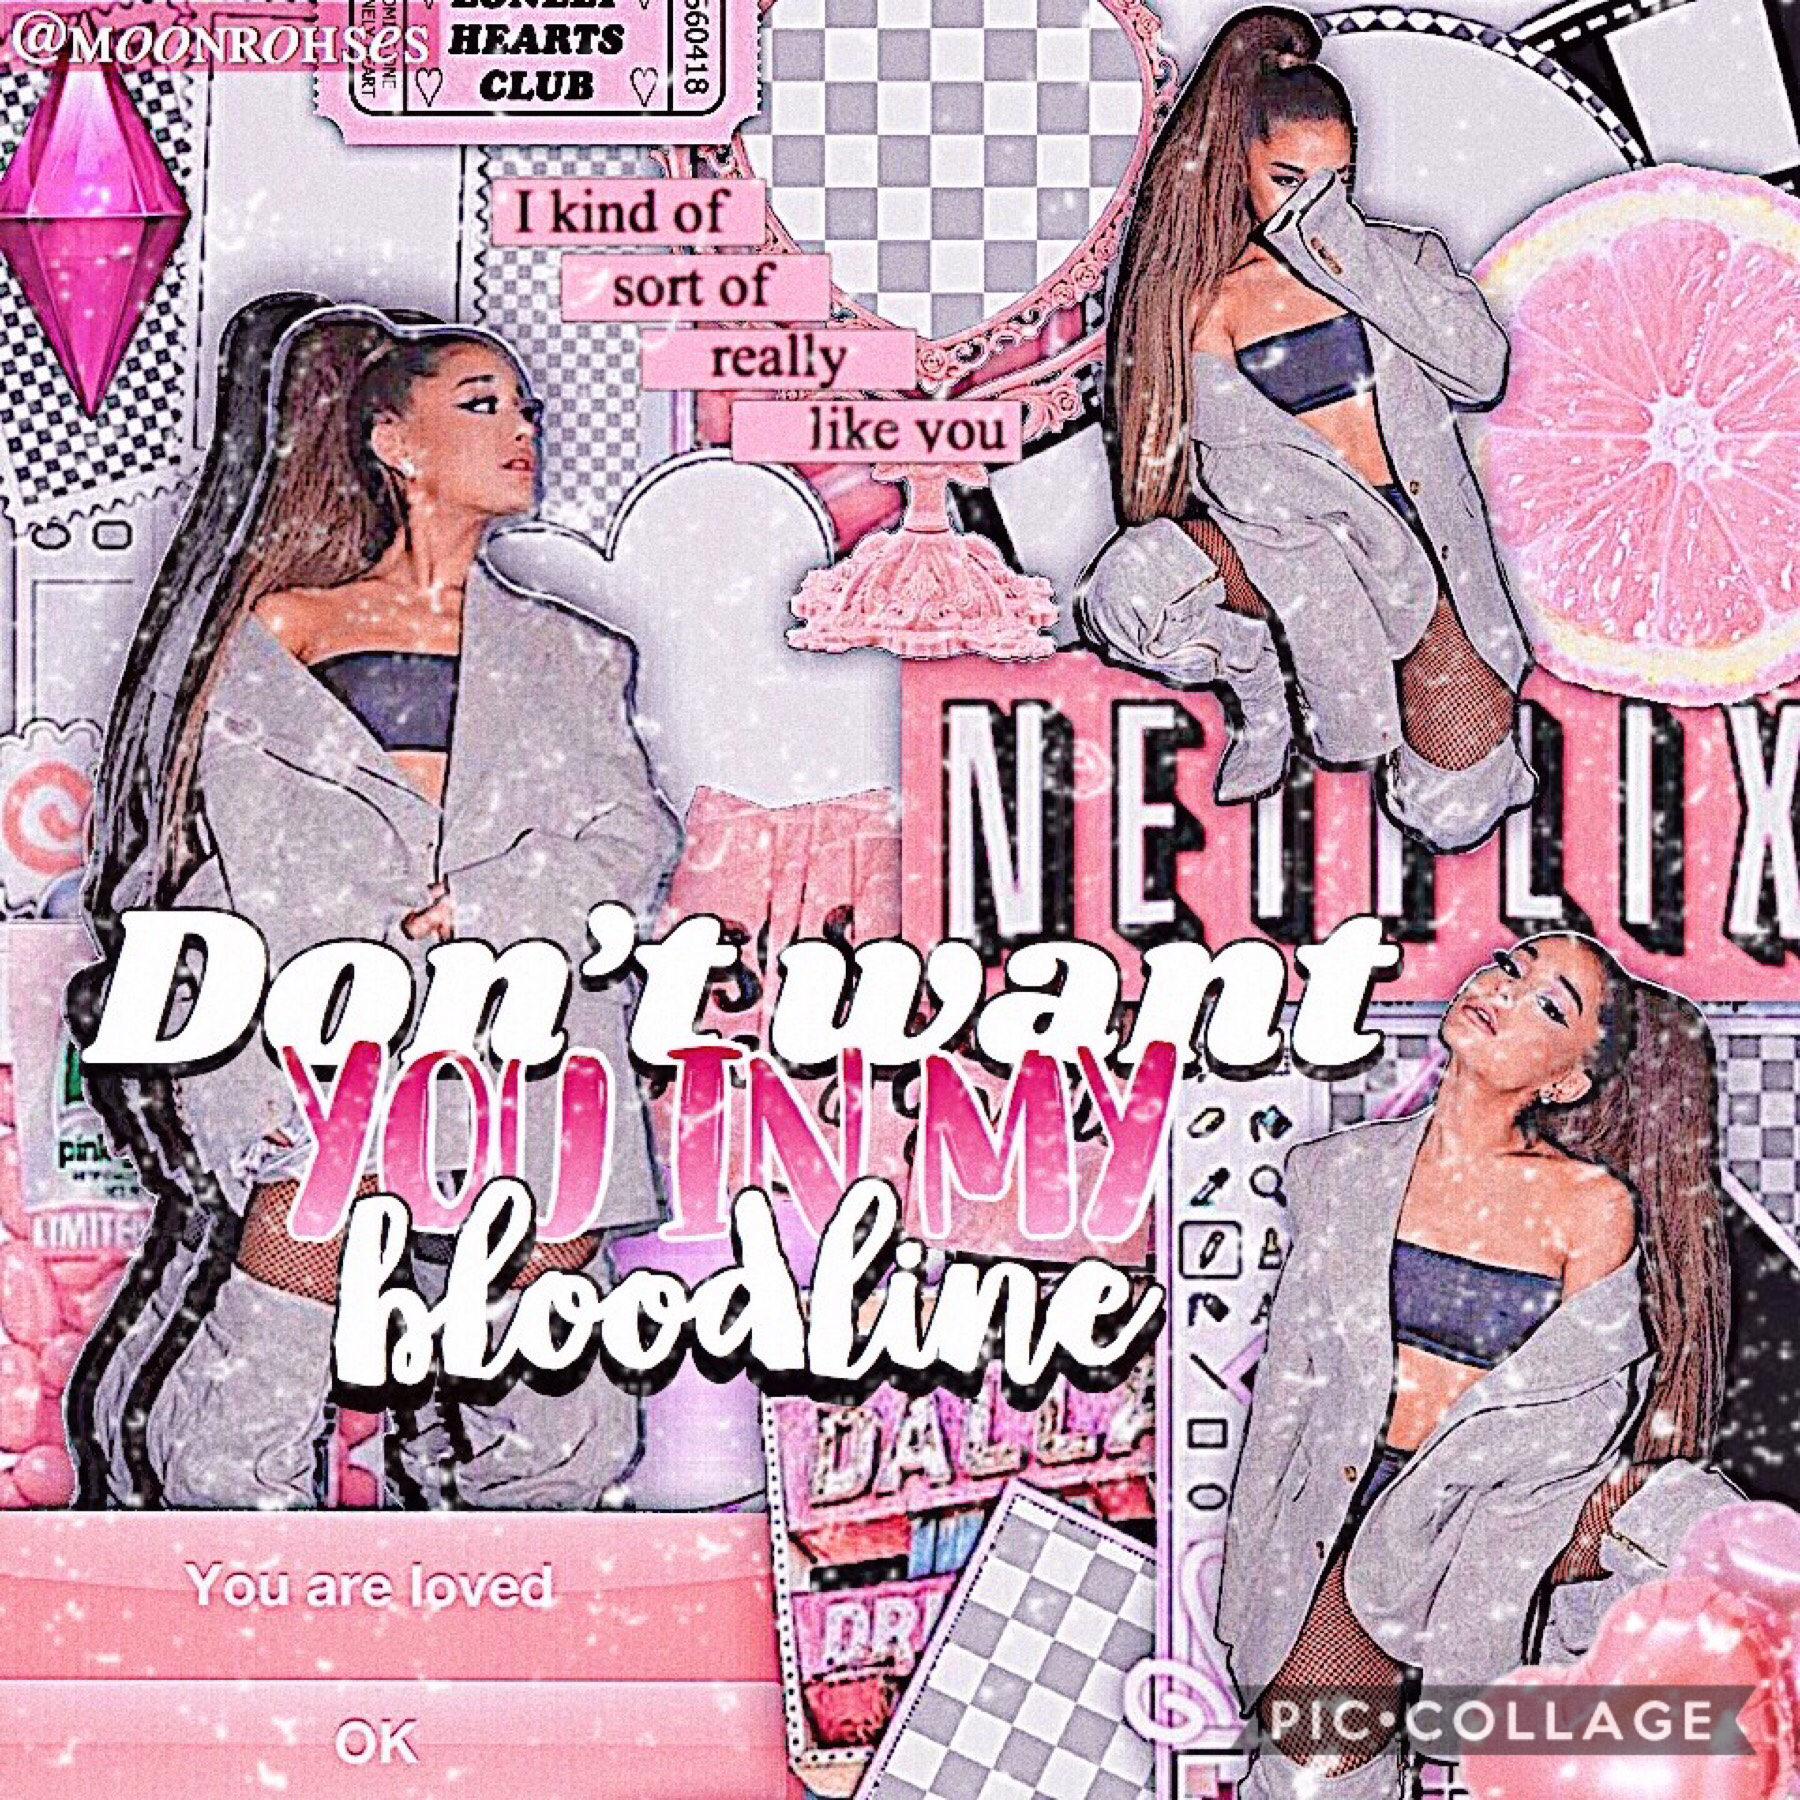 💗 t a p 💗

Song - bloodline - Ariana Grande 

Rate ?/10

Sorry for not being online much I’ve just kinda been stressed out with school